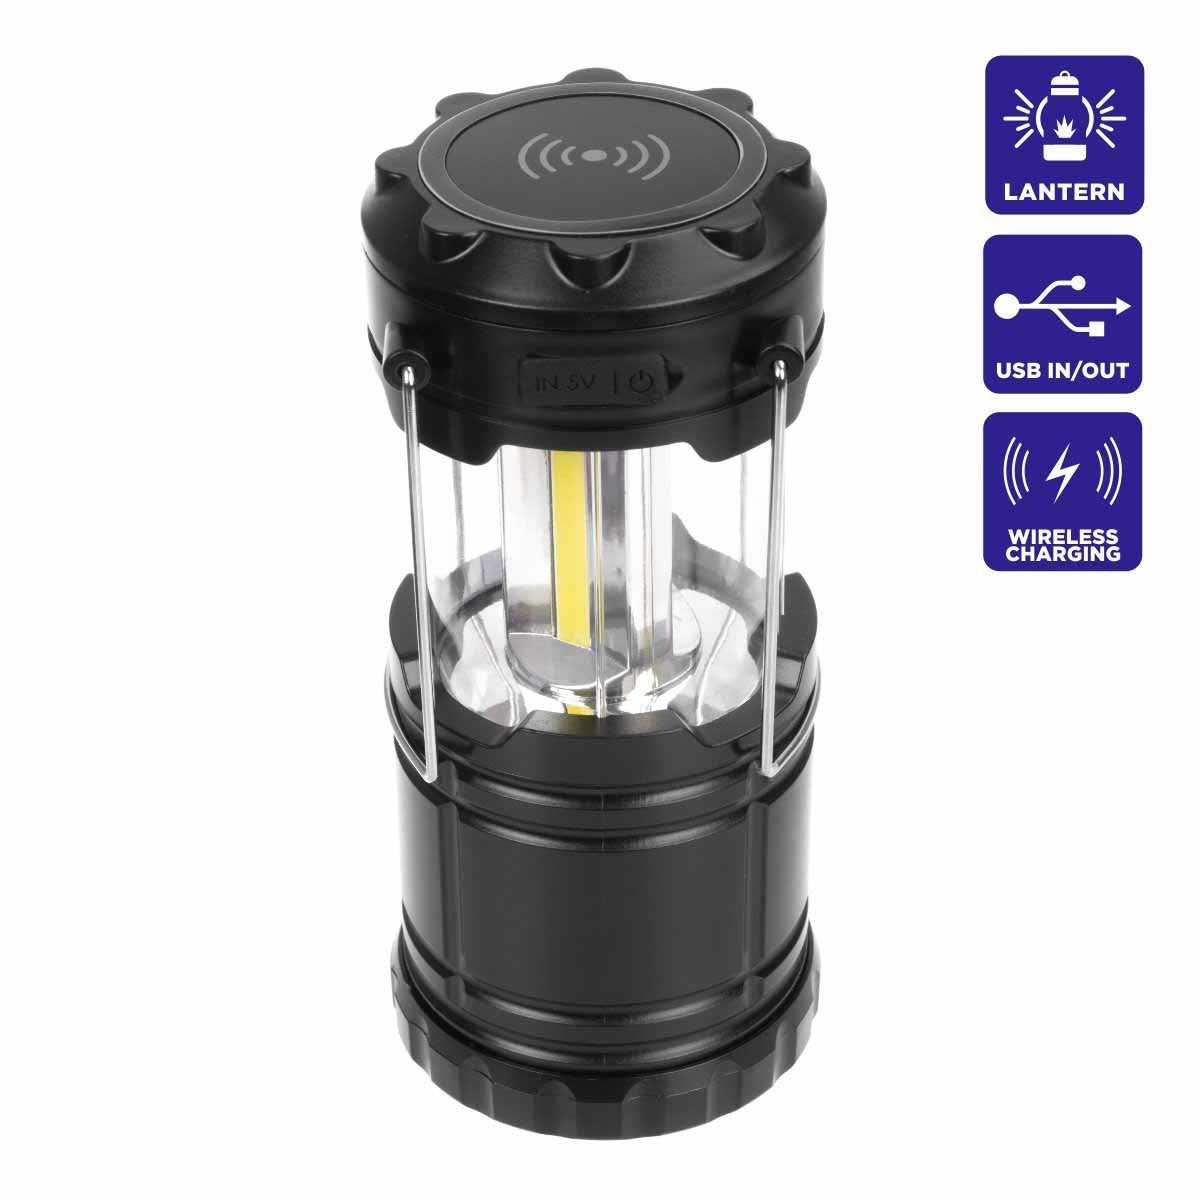 Camping Lantern with Power Bank, Wireless Charge